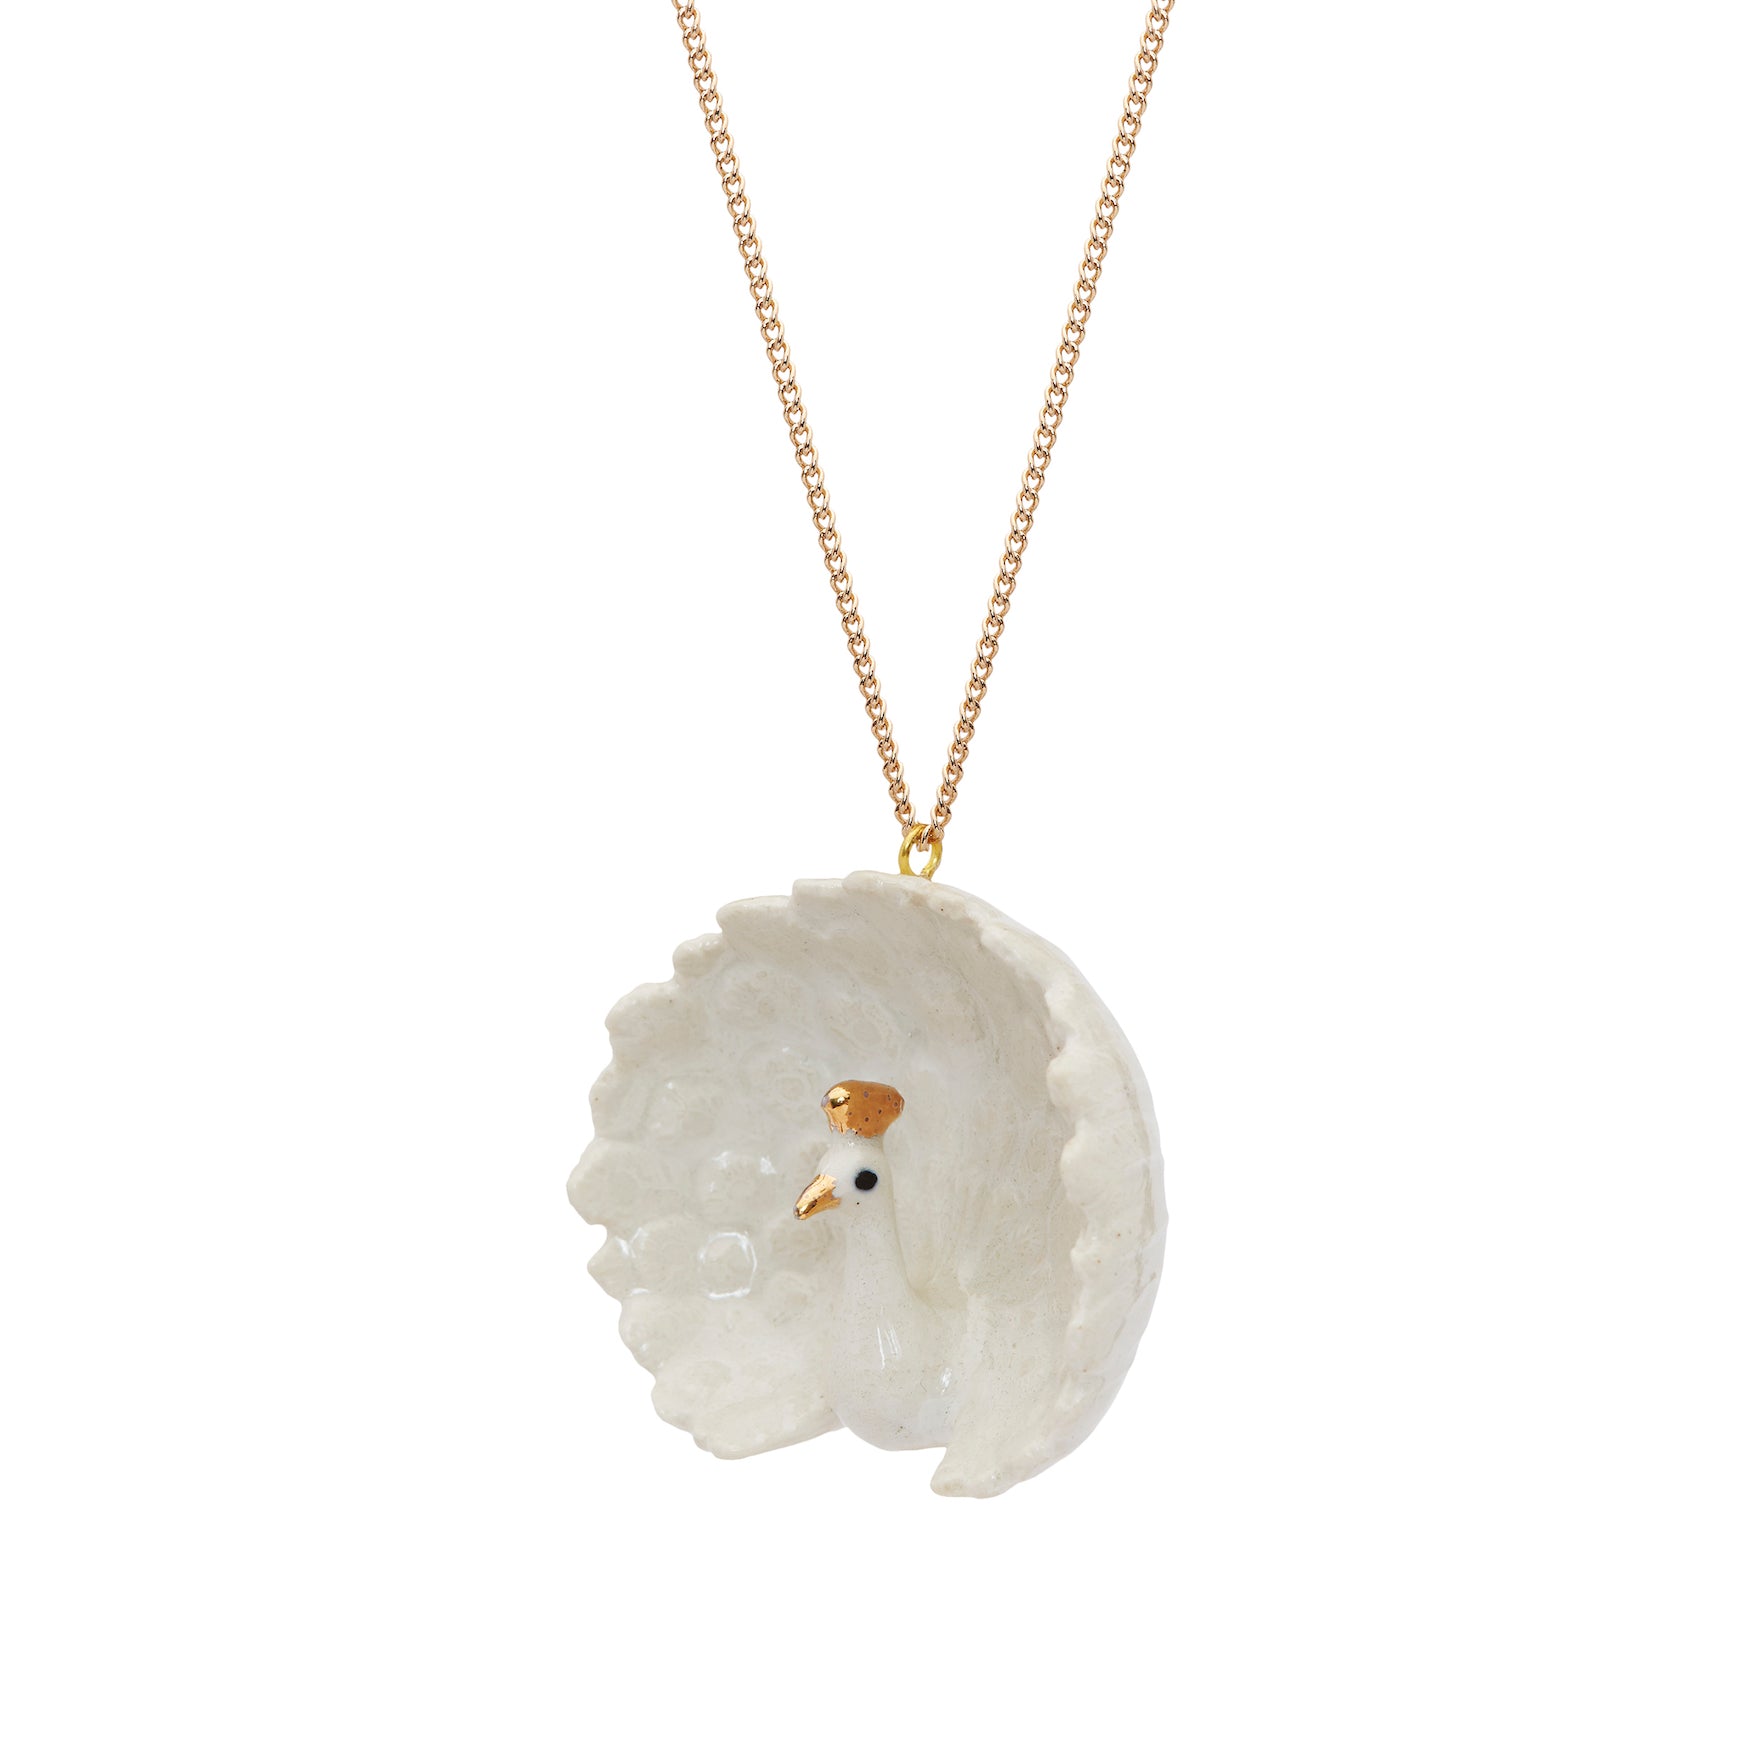 Autumn Sale - White and Gold Peacock Necklace